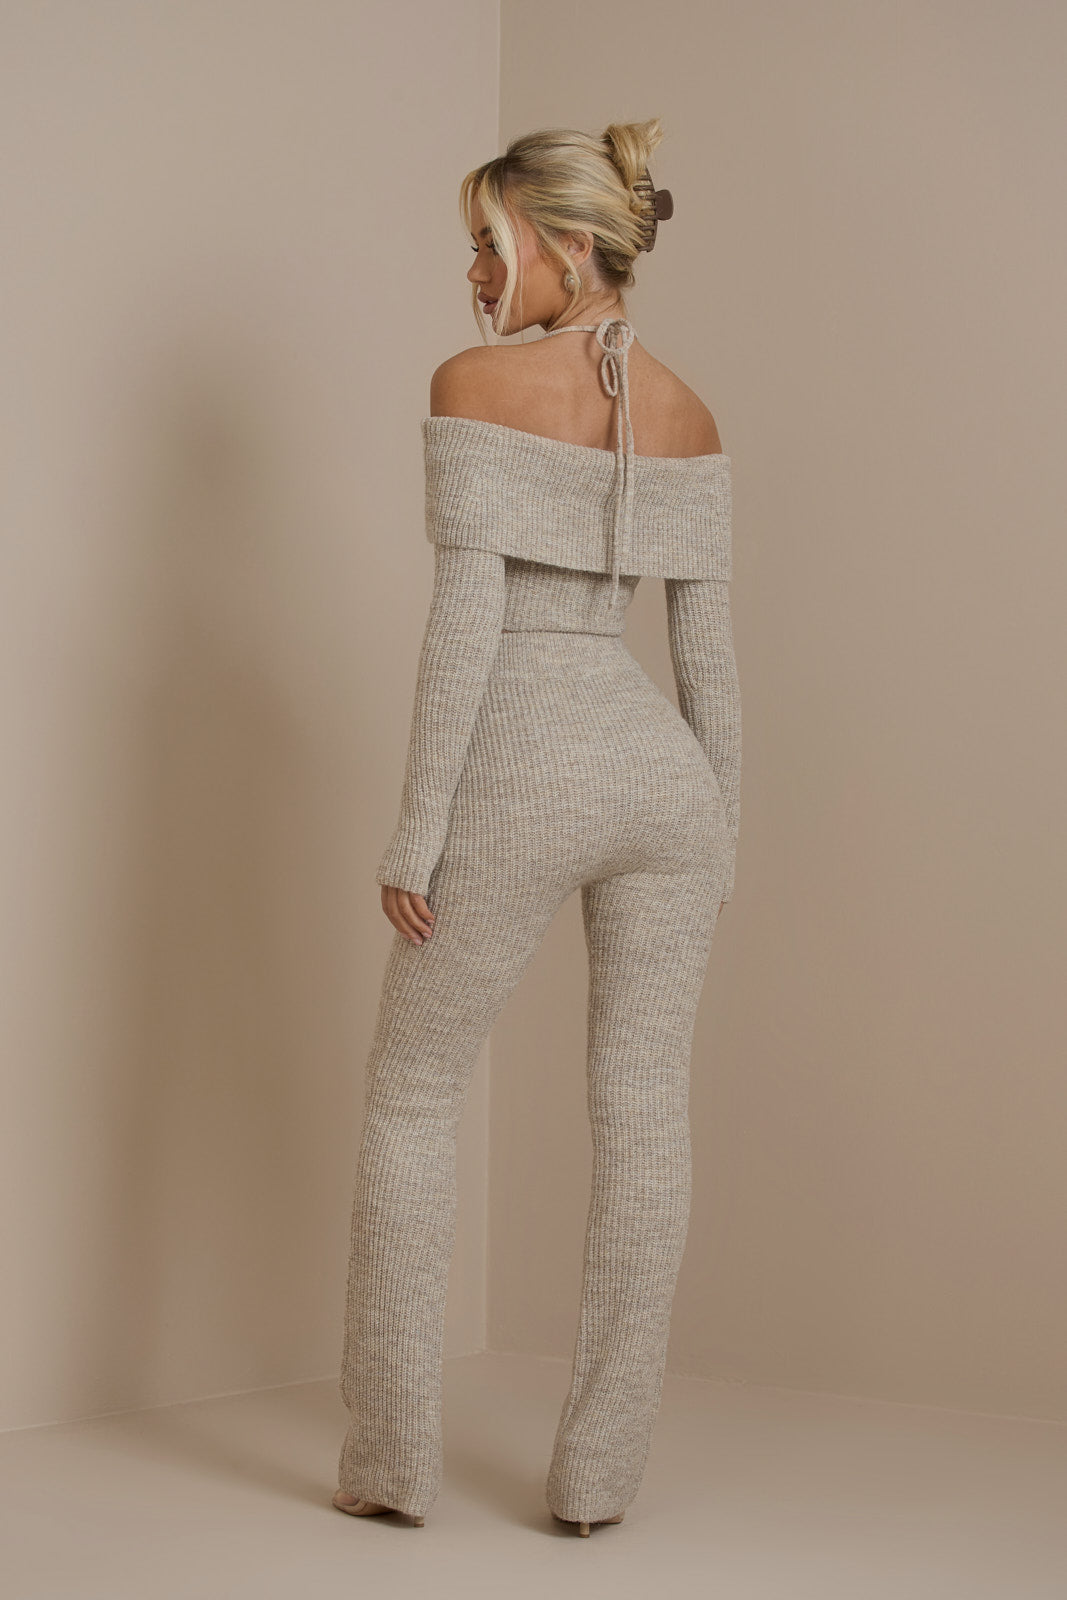 OATMEAL CARRIE PREMIUM KNIT COORD SET